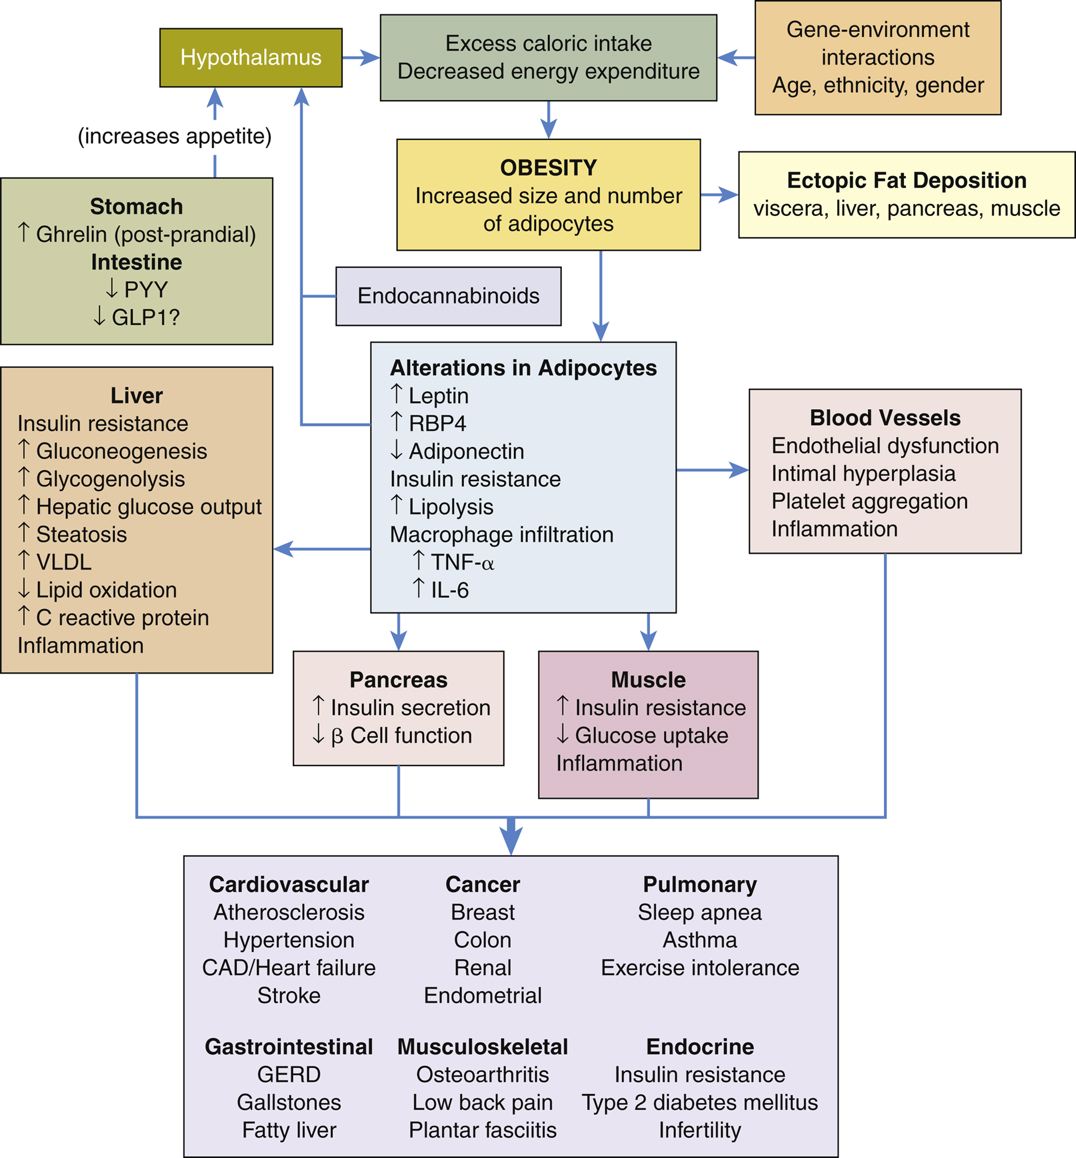 Pathophysiology and Common Complications of Obesity